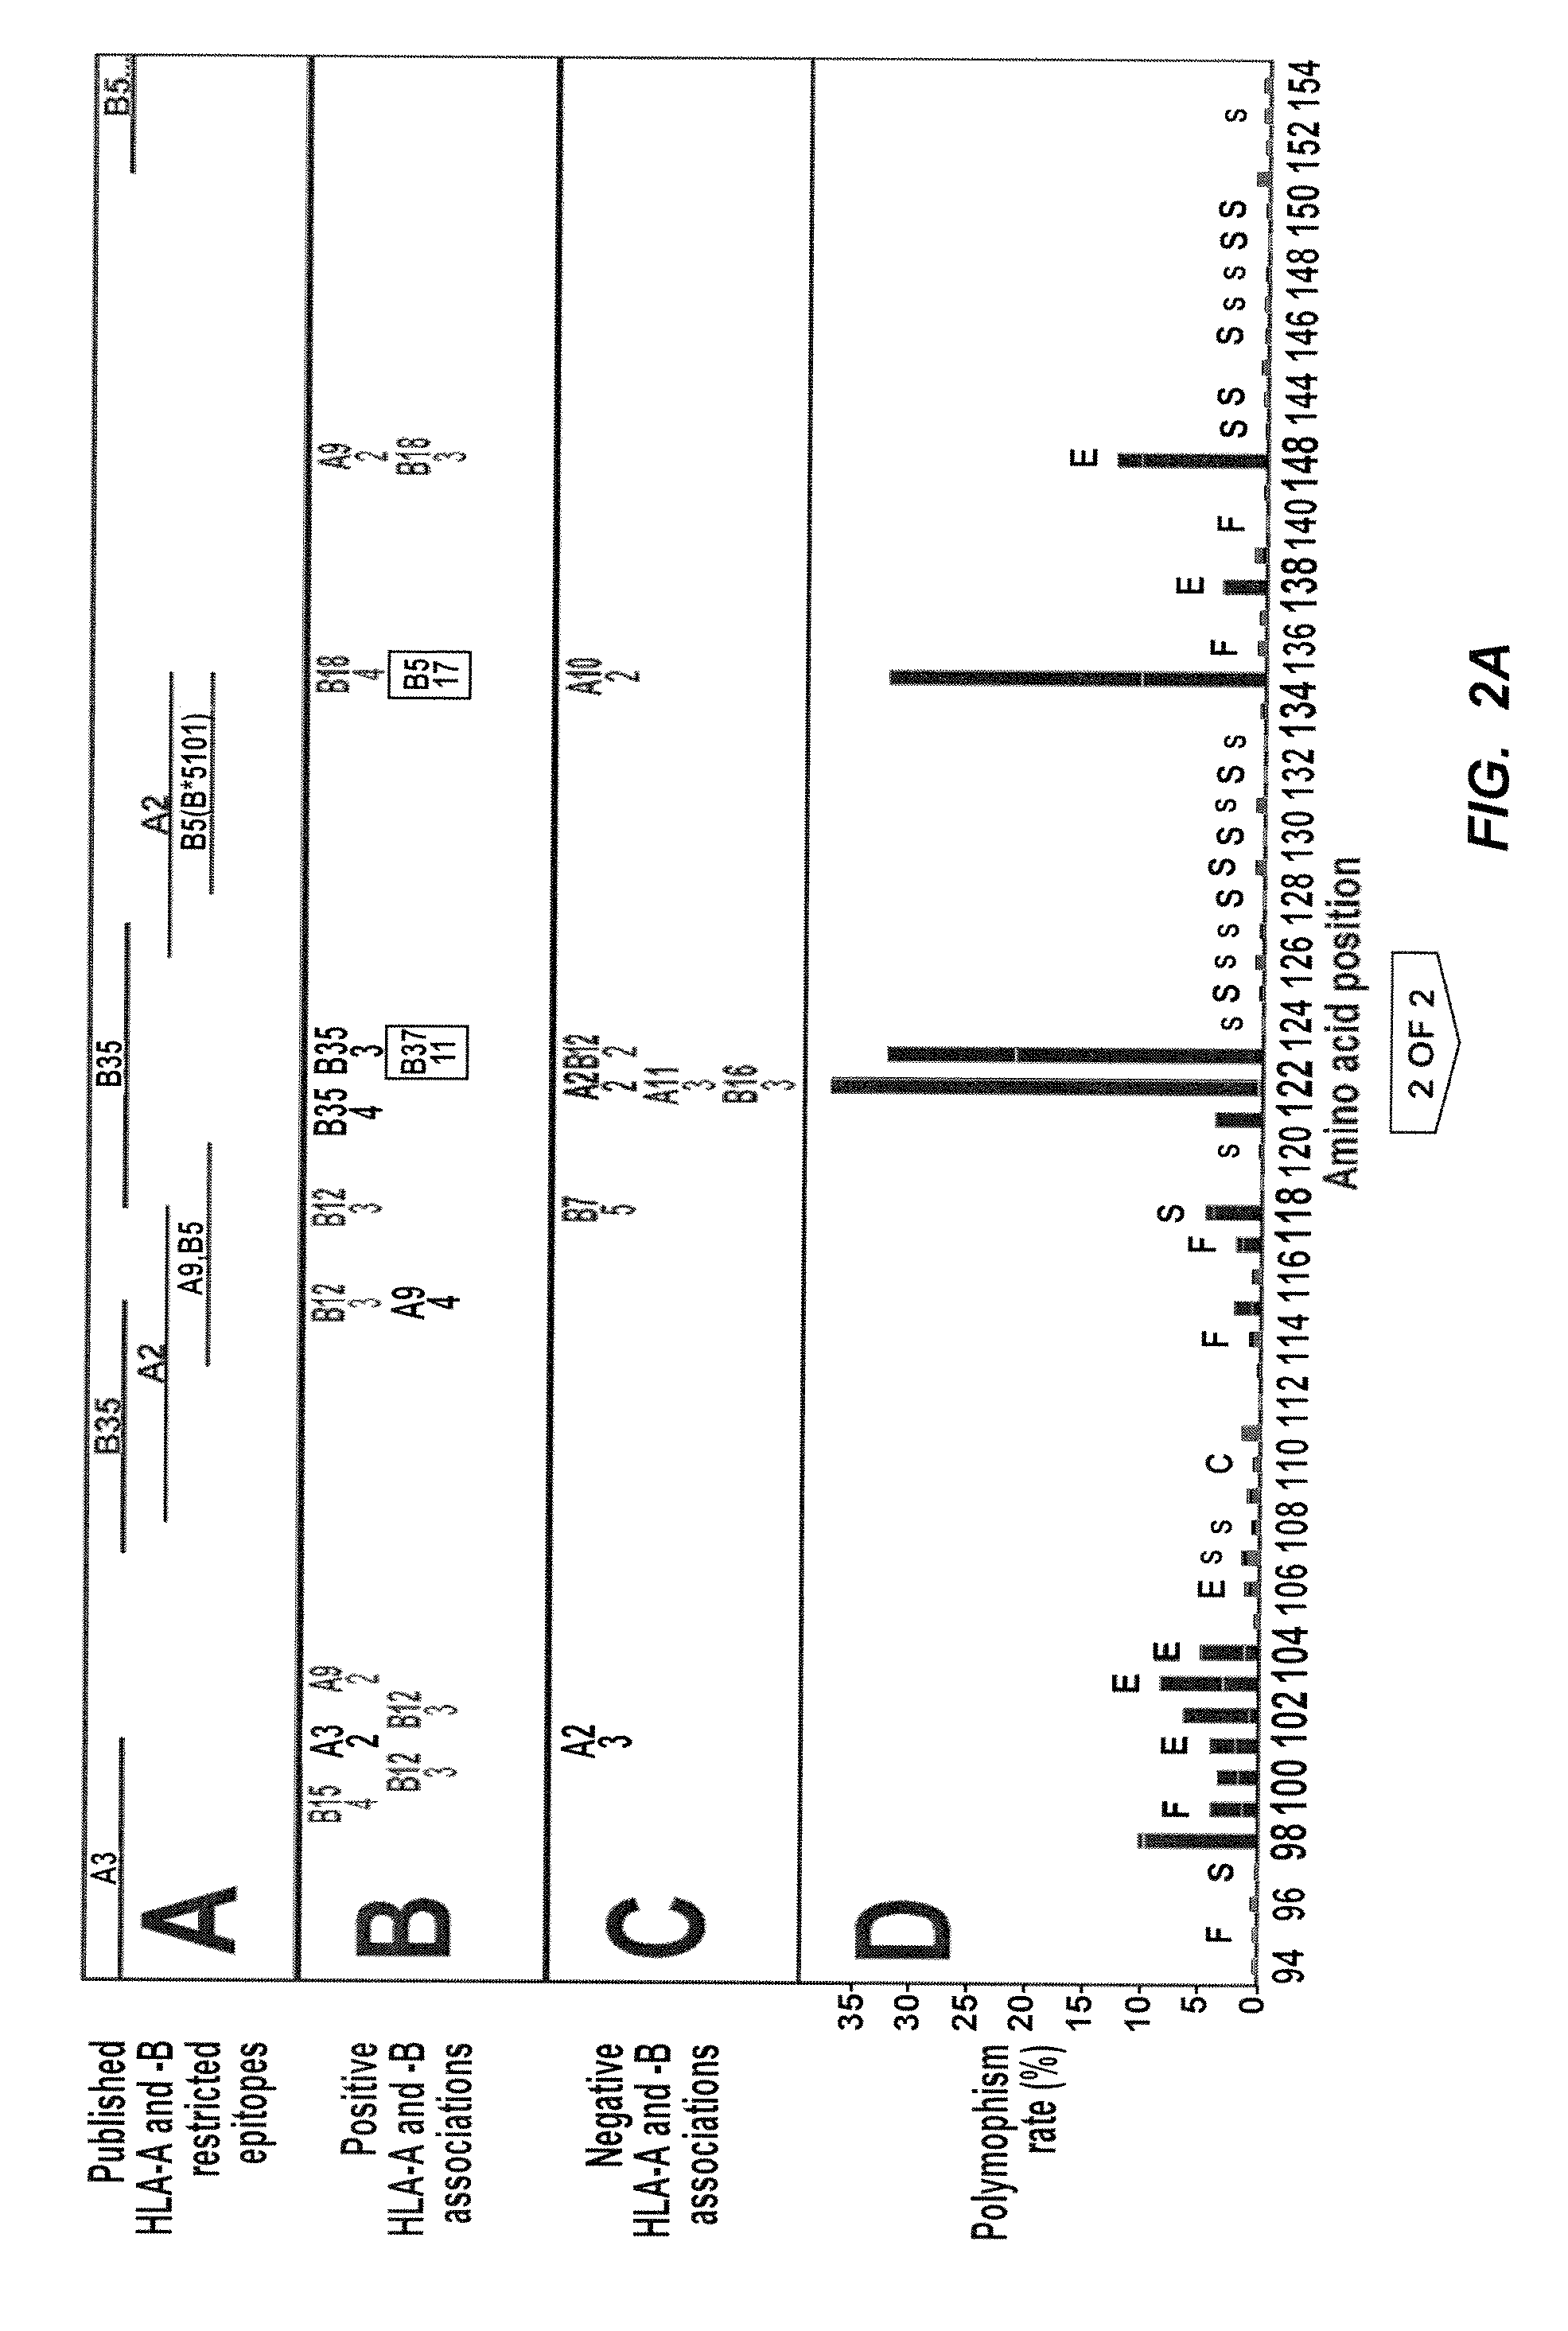 Method for Identification and Development of Therapeutic Agents